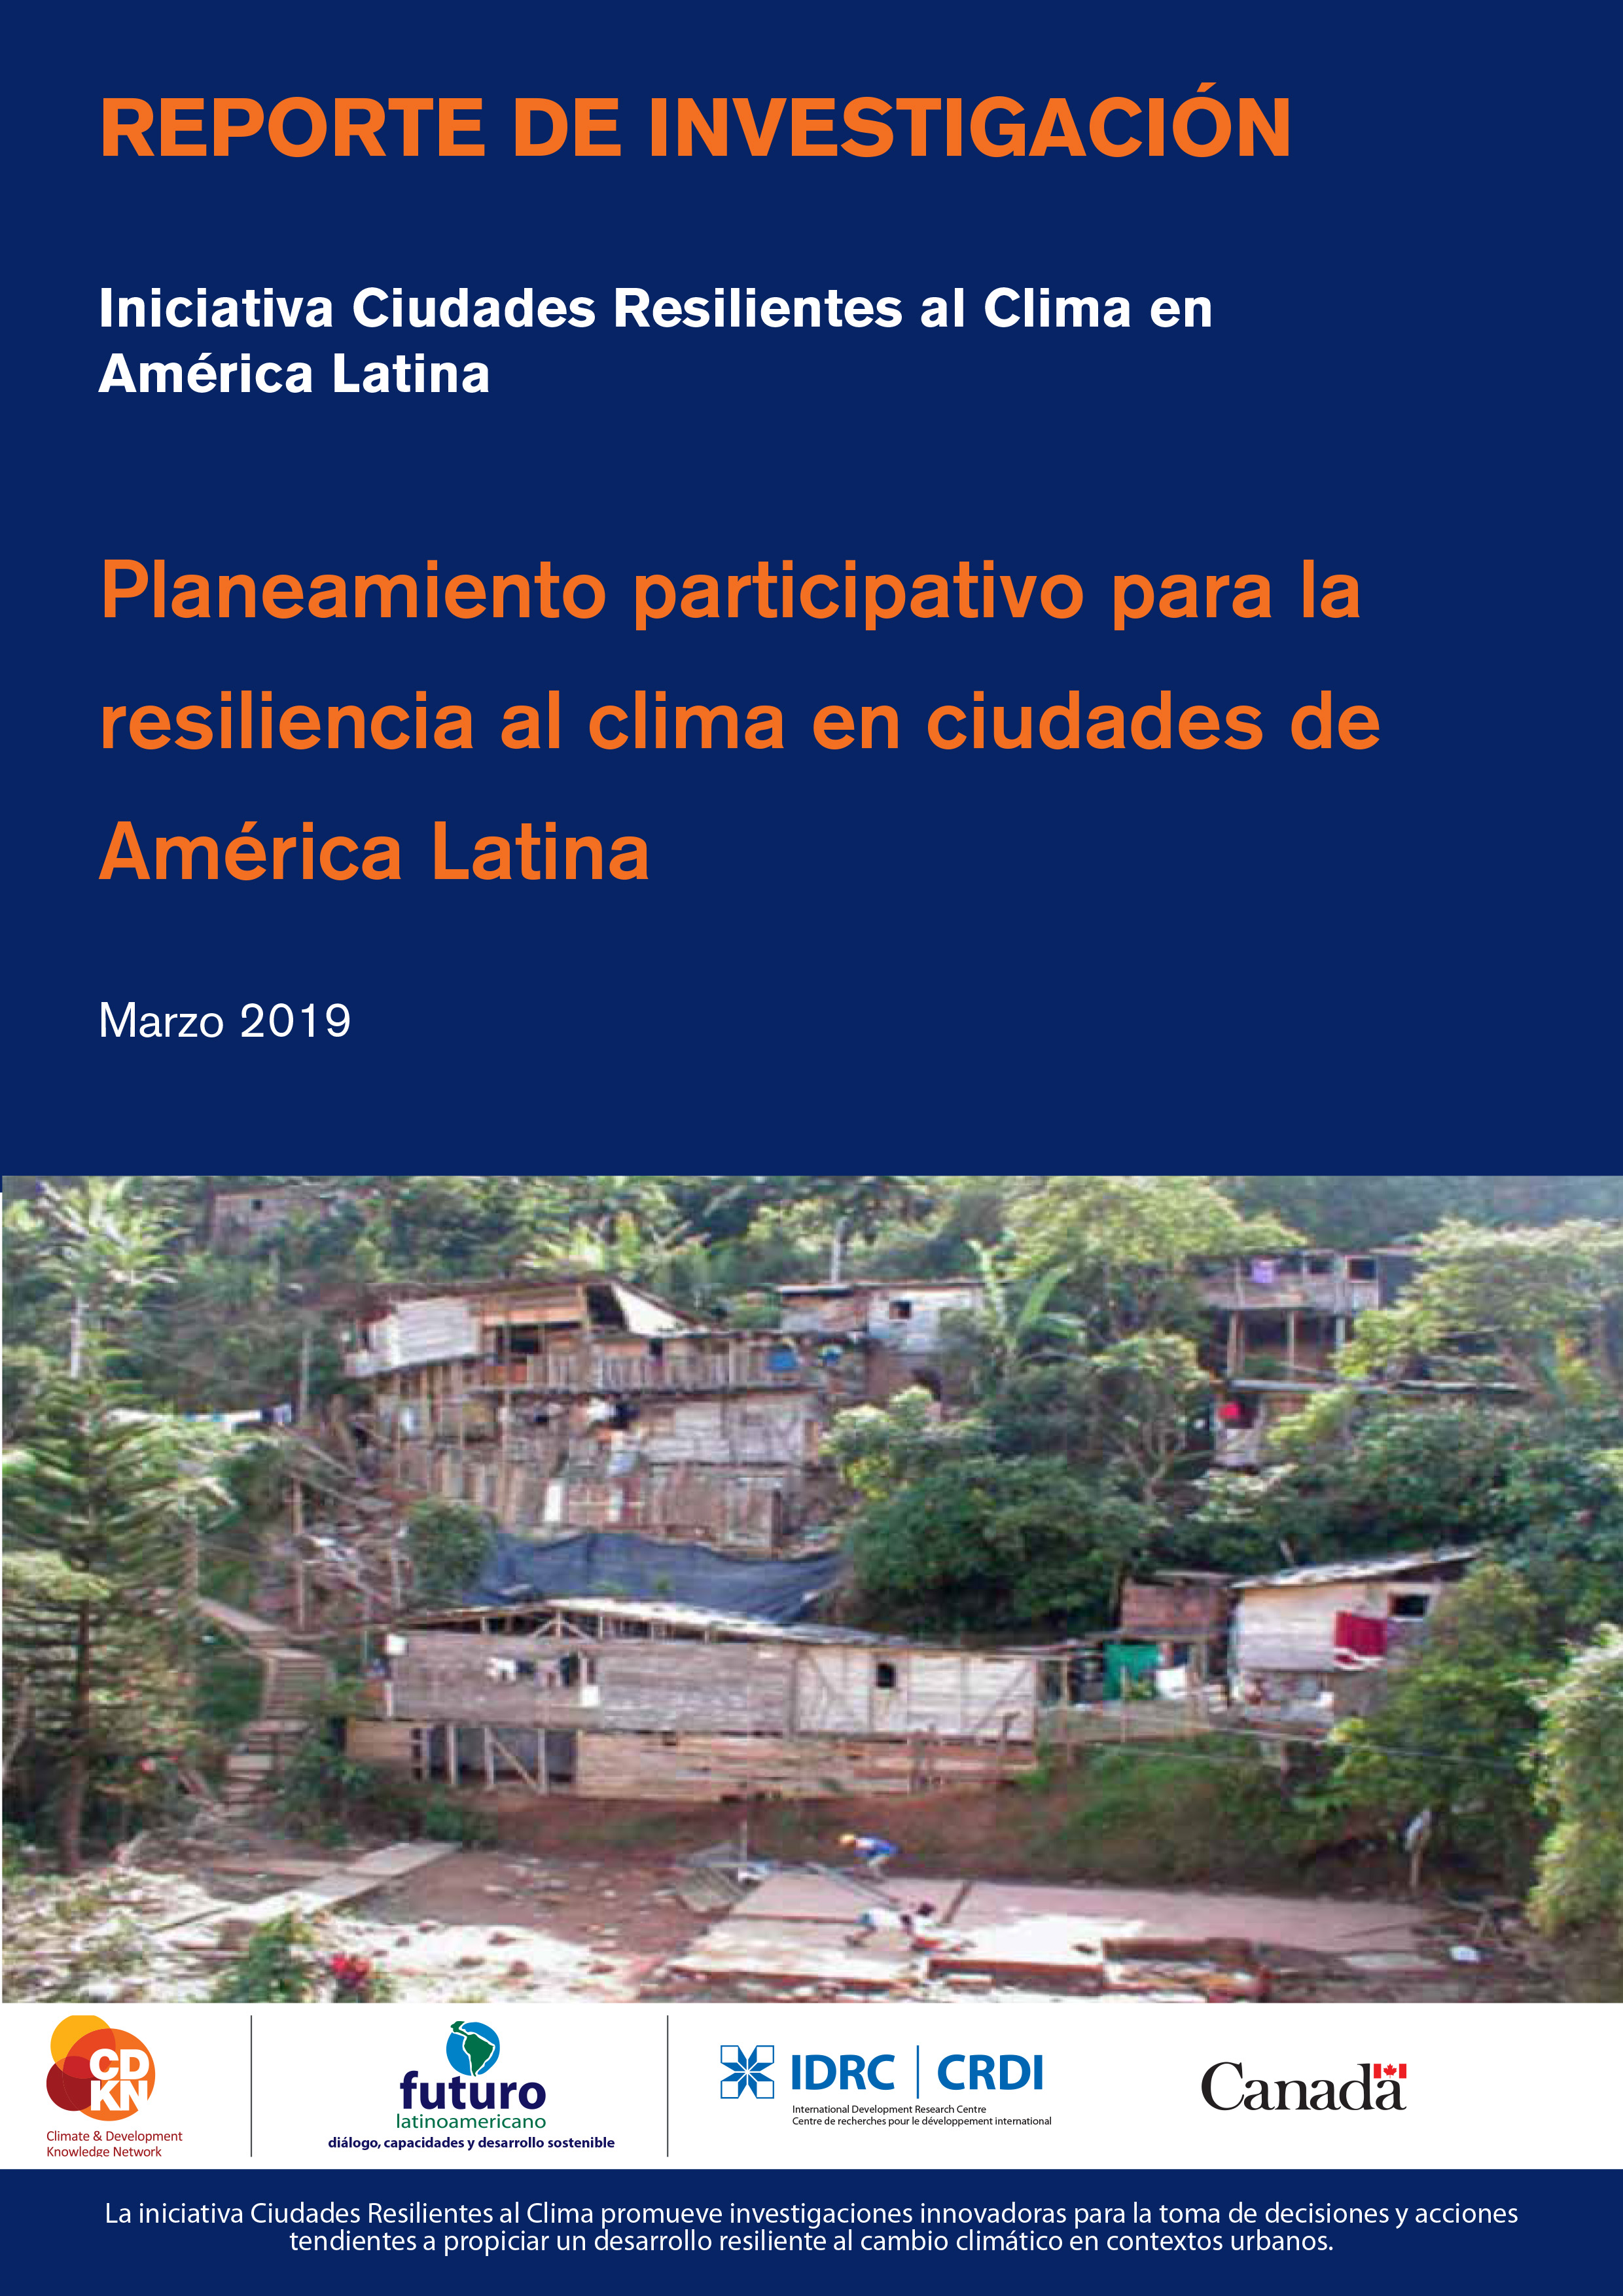 Climate Resilient Cities Investigative Reports are Published